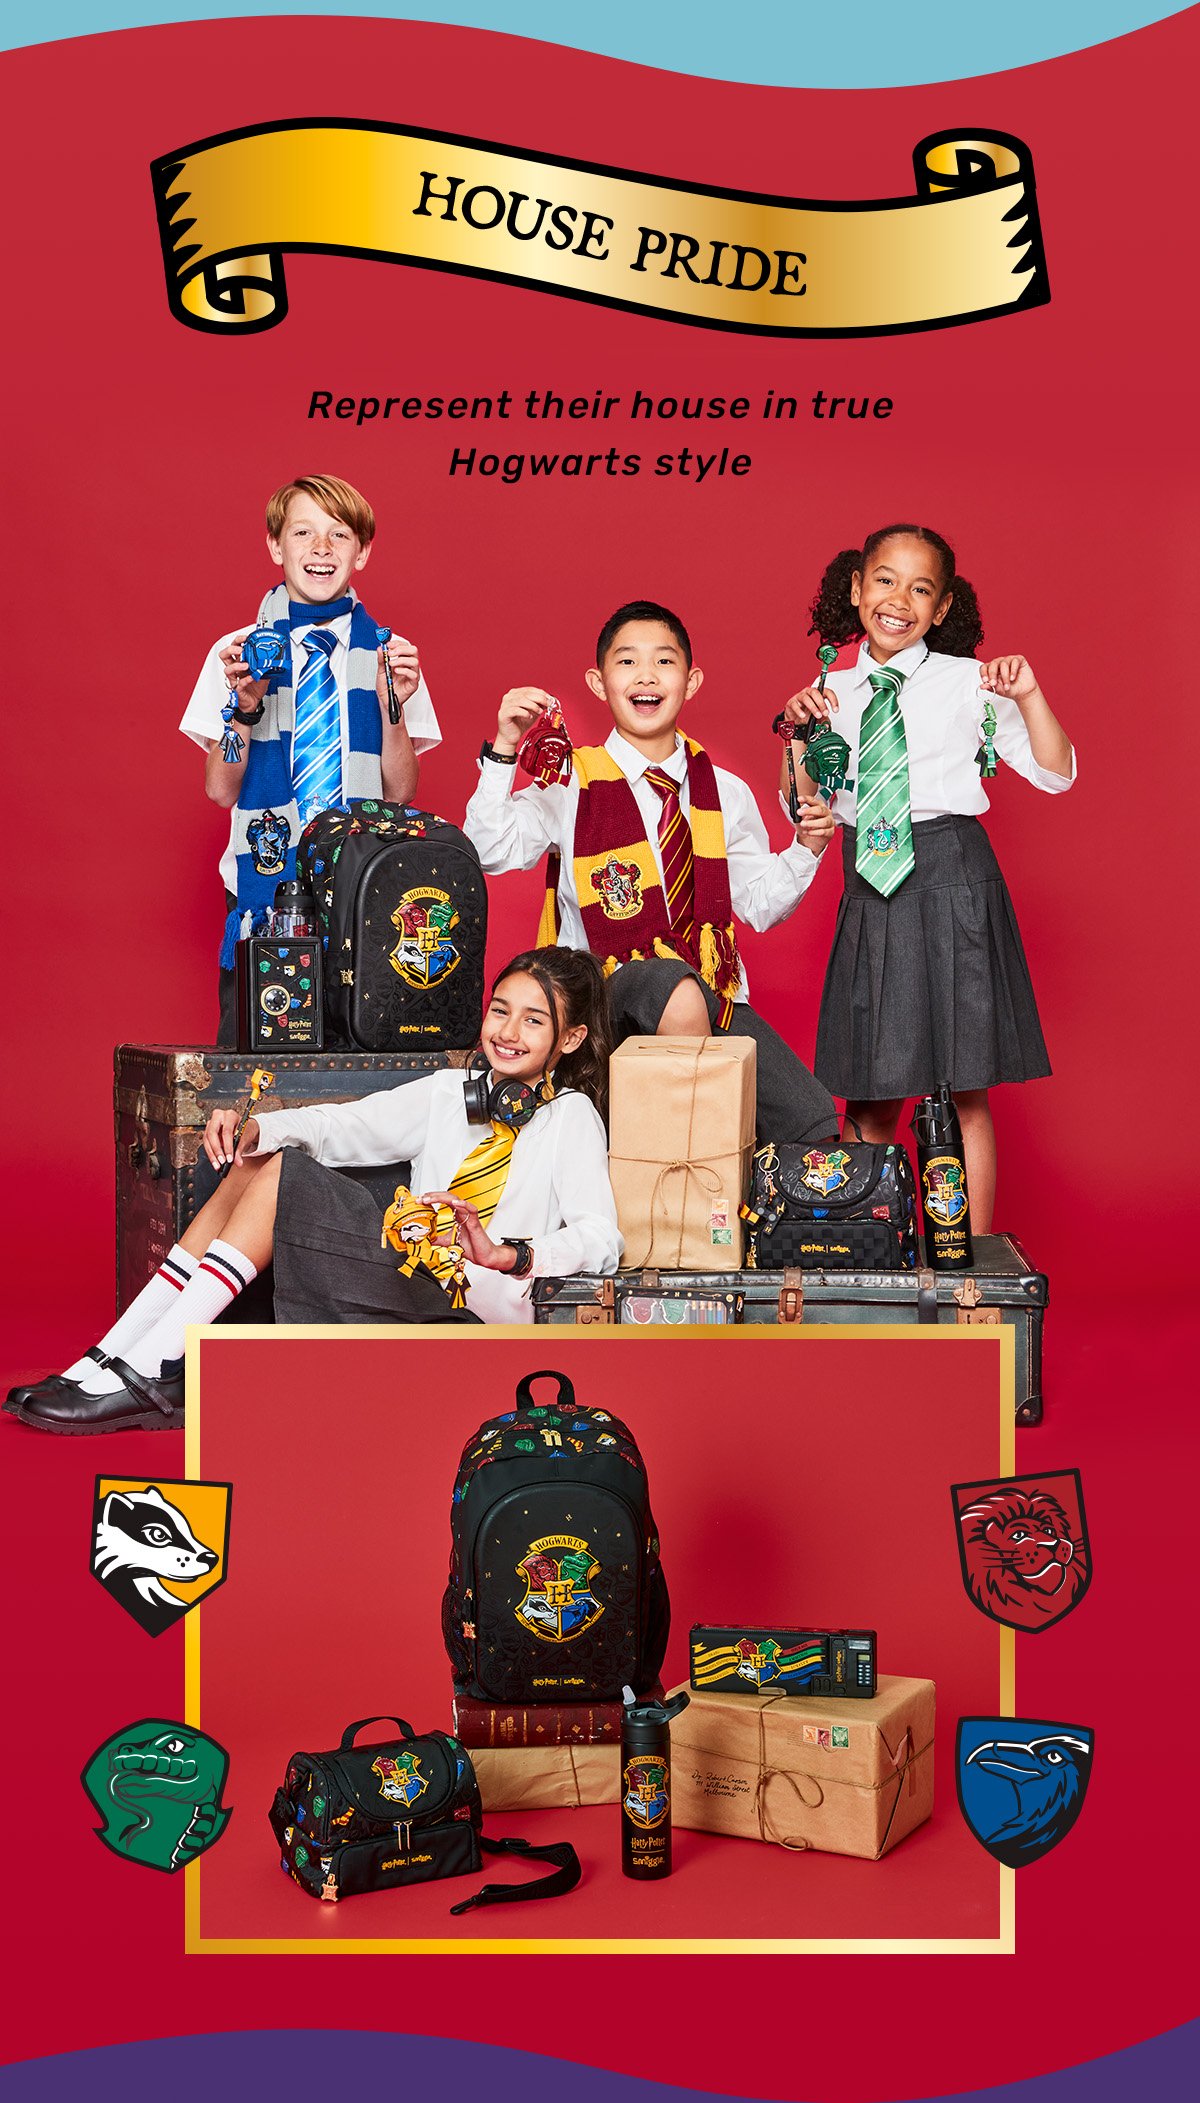 Smiggle x Harry Potter Has Bags & Stationary With All 4 Houses